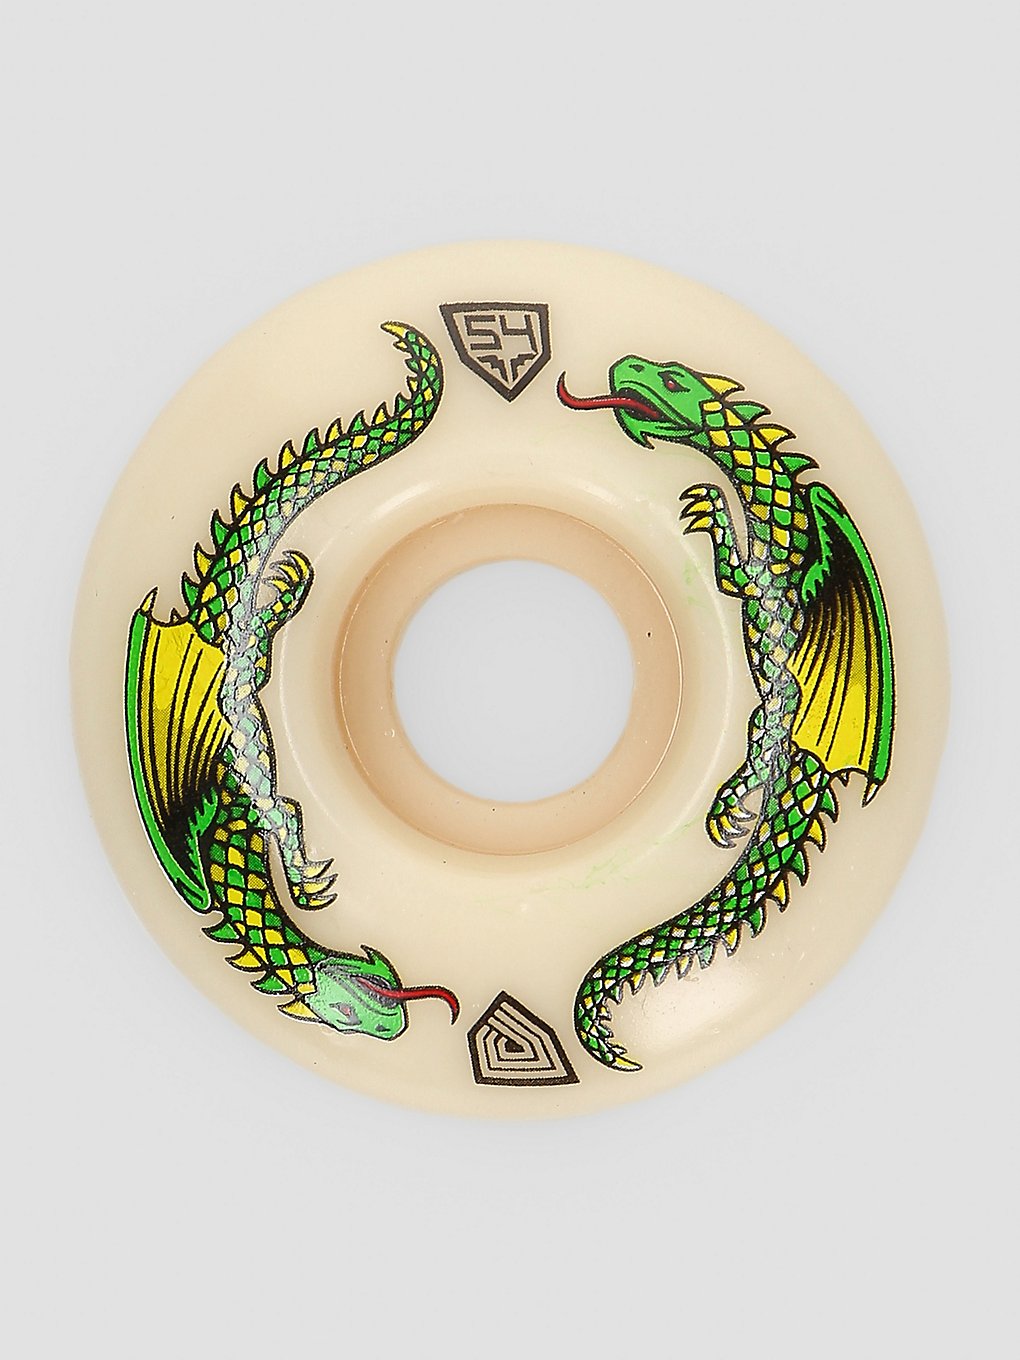 Powell Peralta Dragons 93A V4 Wide 54mm Wielen wit